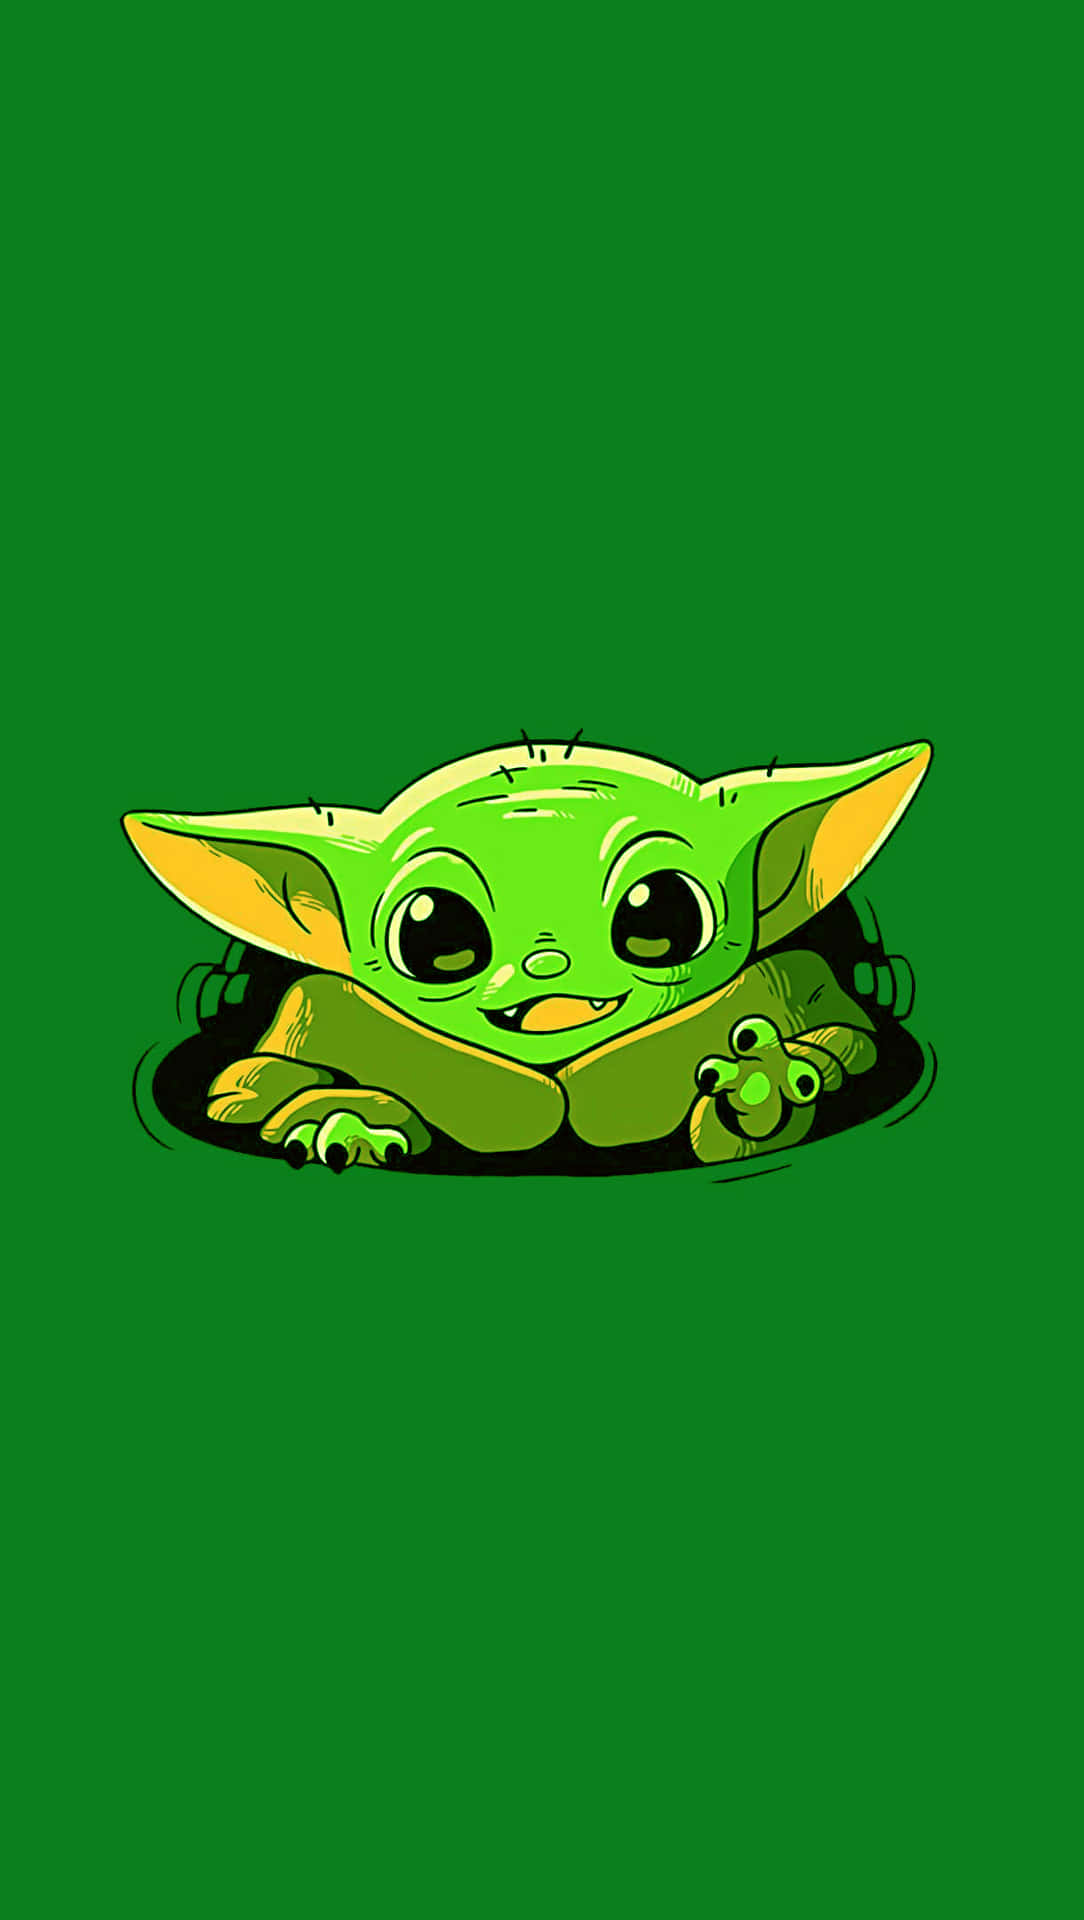 The Baby Yoda Is Sitting On A Green Background Wallpaper